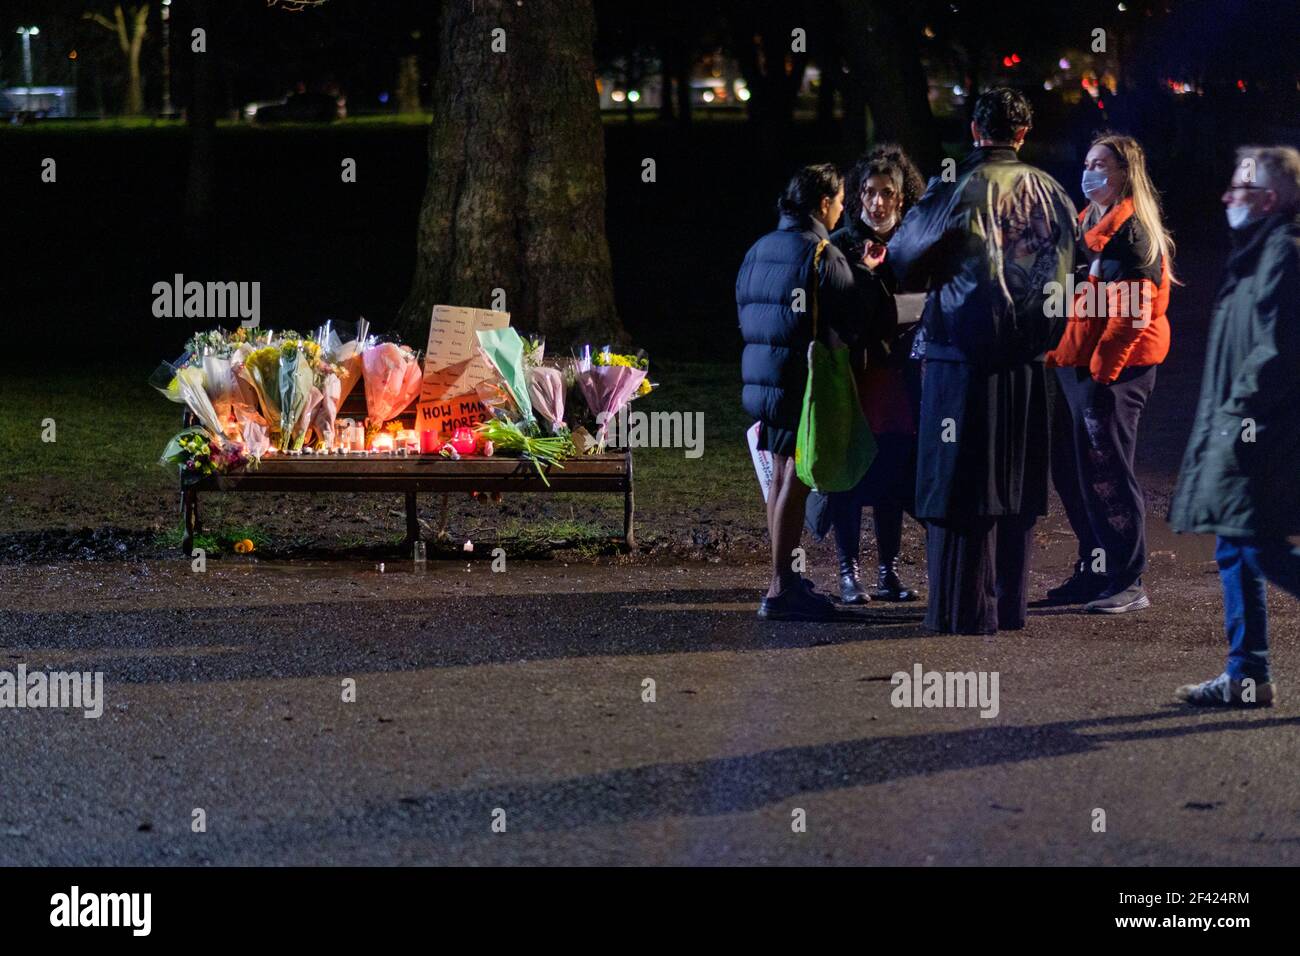 London, UK. 13th March, 2021. People attend a Vigil in memory of Sarah Everard at the Clapham Common bandstand, where floral tributes have been accumulating. the remains of Ms Everard were found in a woodland area in Ashford, a week after she went missing as she walked home from visiting a friend in Clapham. Metropolitan Police Officer Wayne Couzens has been charged with her kidnap and murder raising concerns over women’s safety. The Police are being criticised over their response to the Vigil where the enforcement of Covid Regulations  ended with the arrest of 4 people. Credit: Joao Daniel Pe Stock Photo